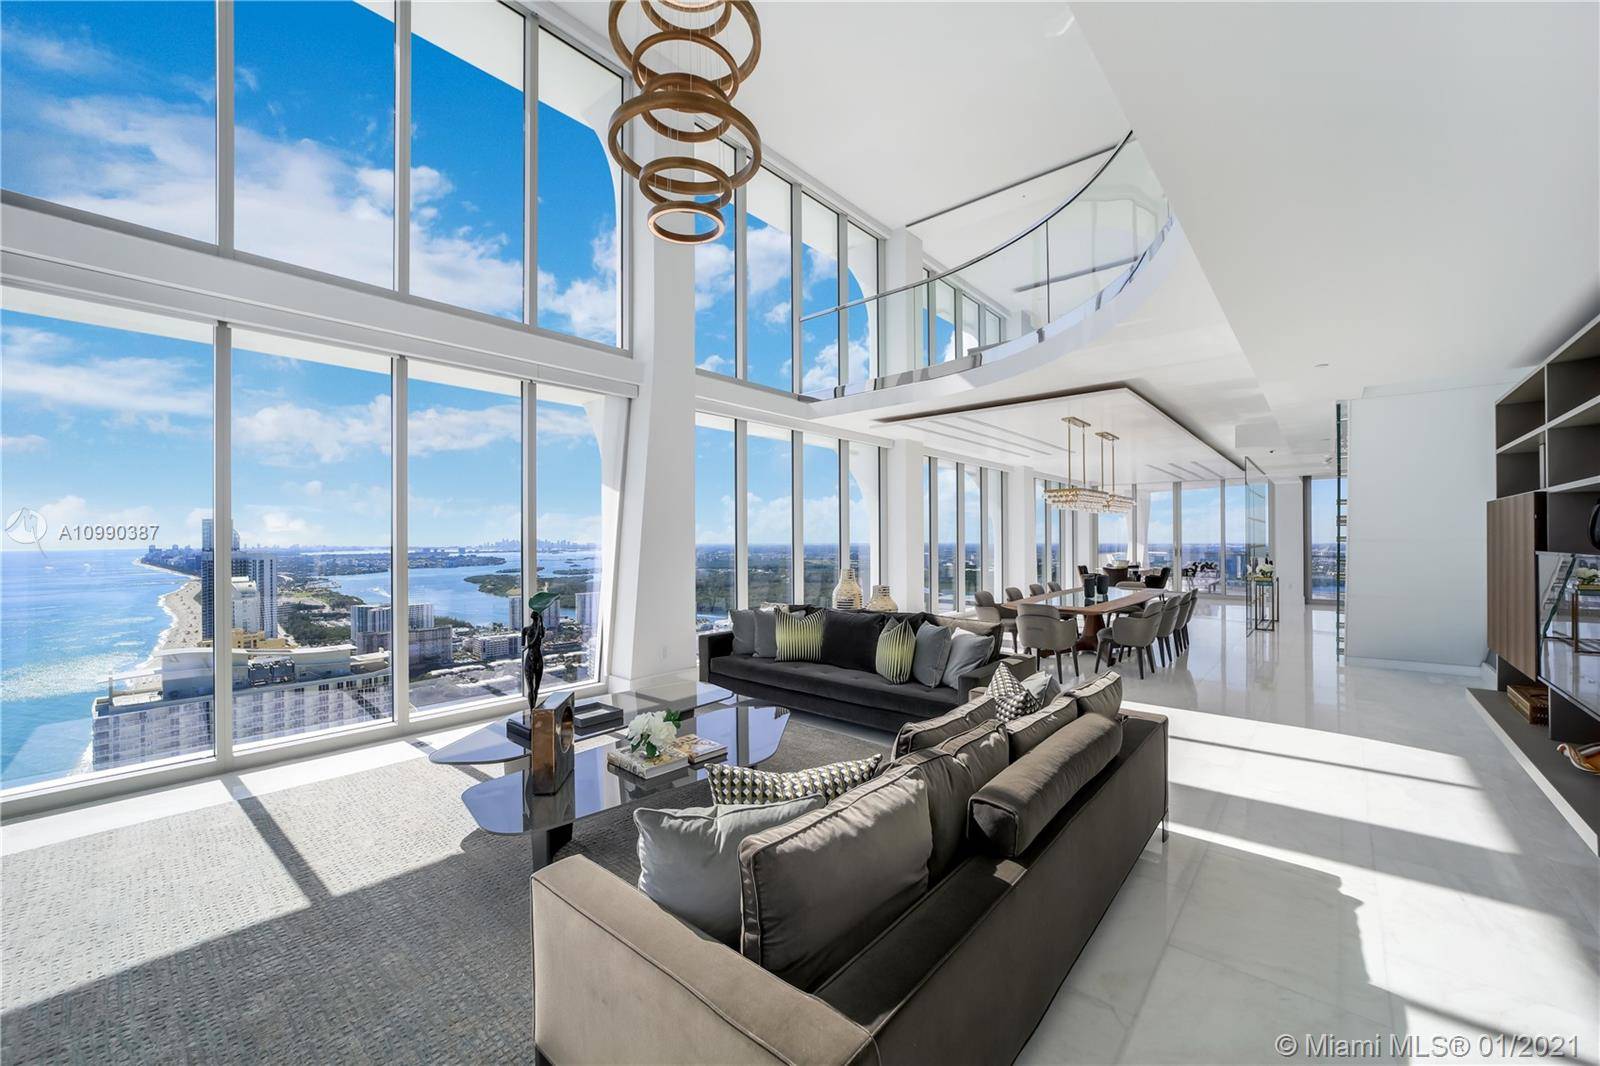 State of the art living meets pristine oceanfront coastal views in this Jade Signature residence, part of the ultra luxury condo tower created by Pritzker prize winning Swiss architects, Herzog ...